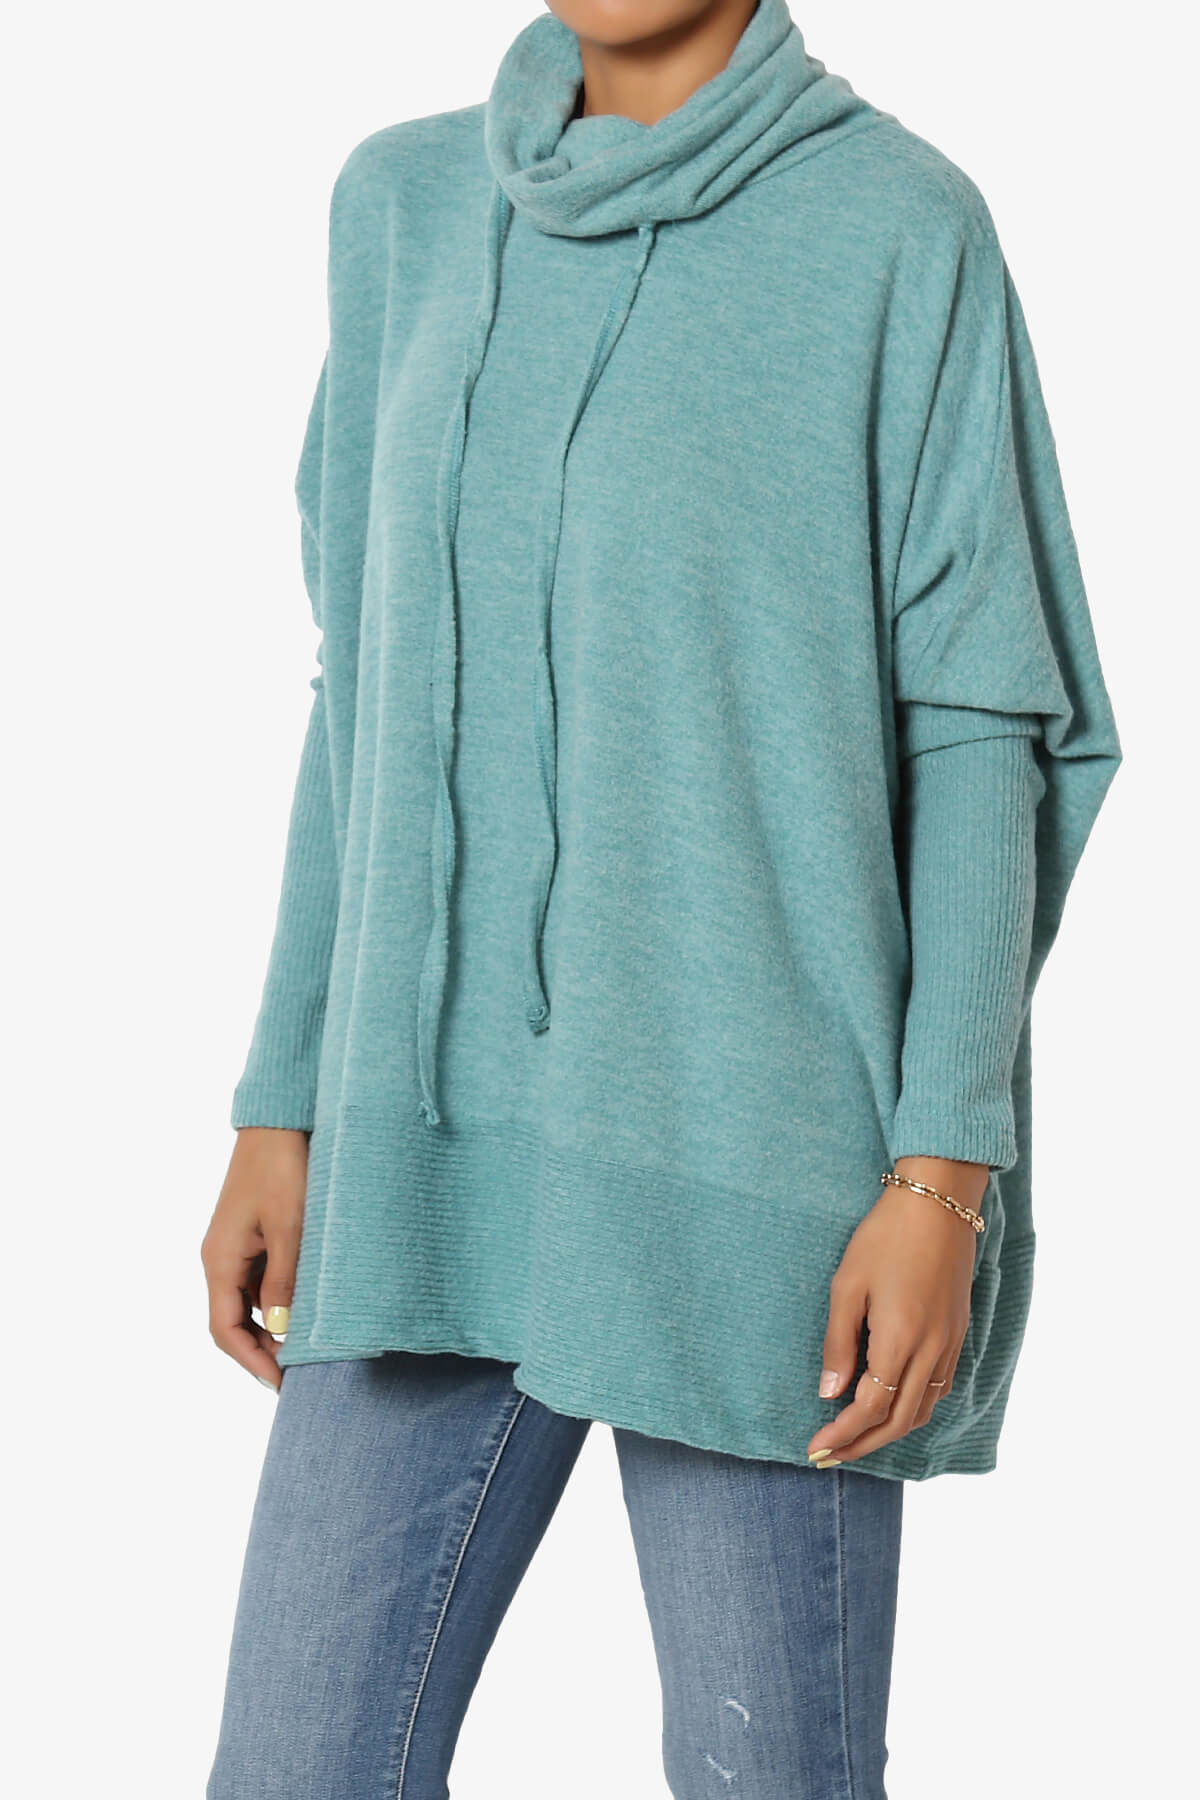 Load image into Gallery viewer, Barclay Cowl Neck Melange Knit Oversized Sweater DUSTY TEAL_3
